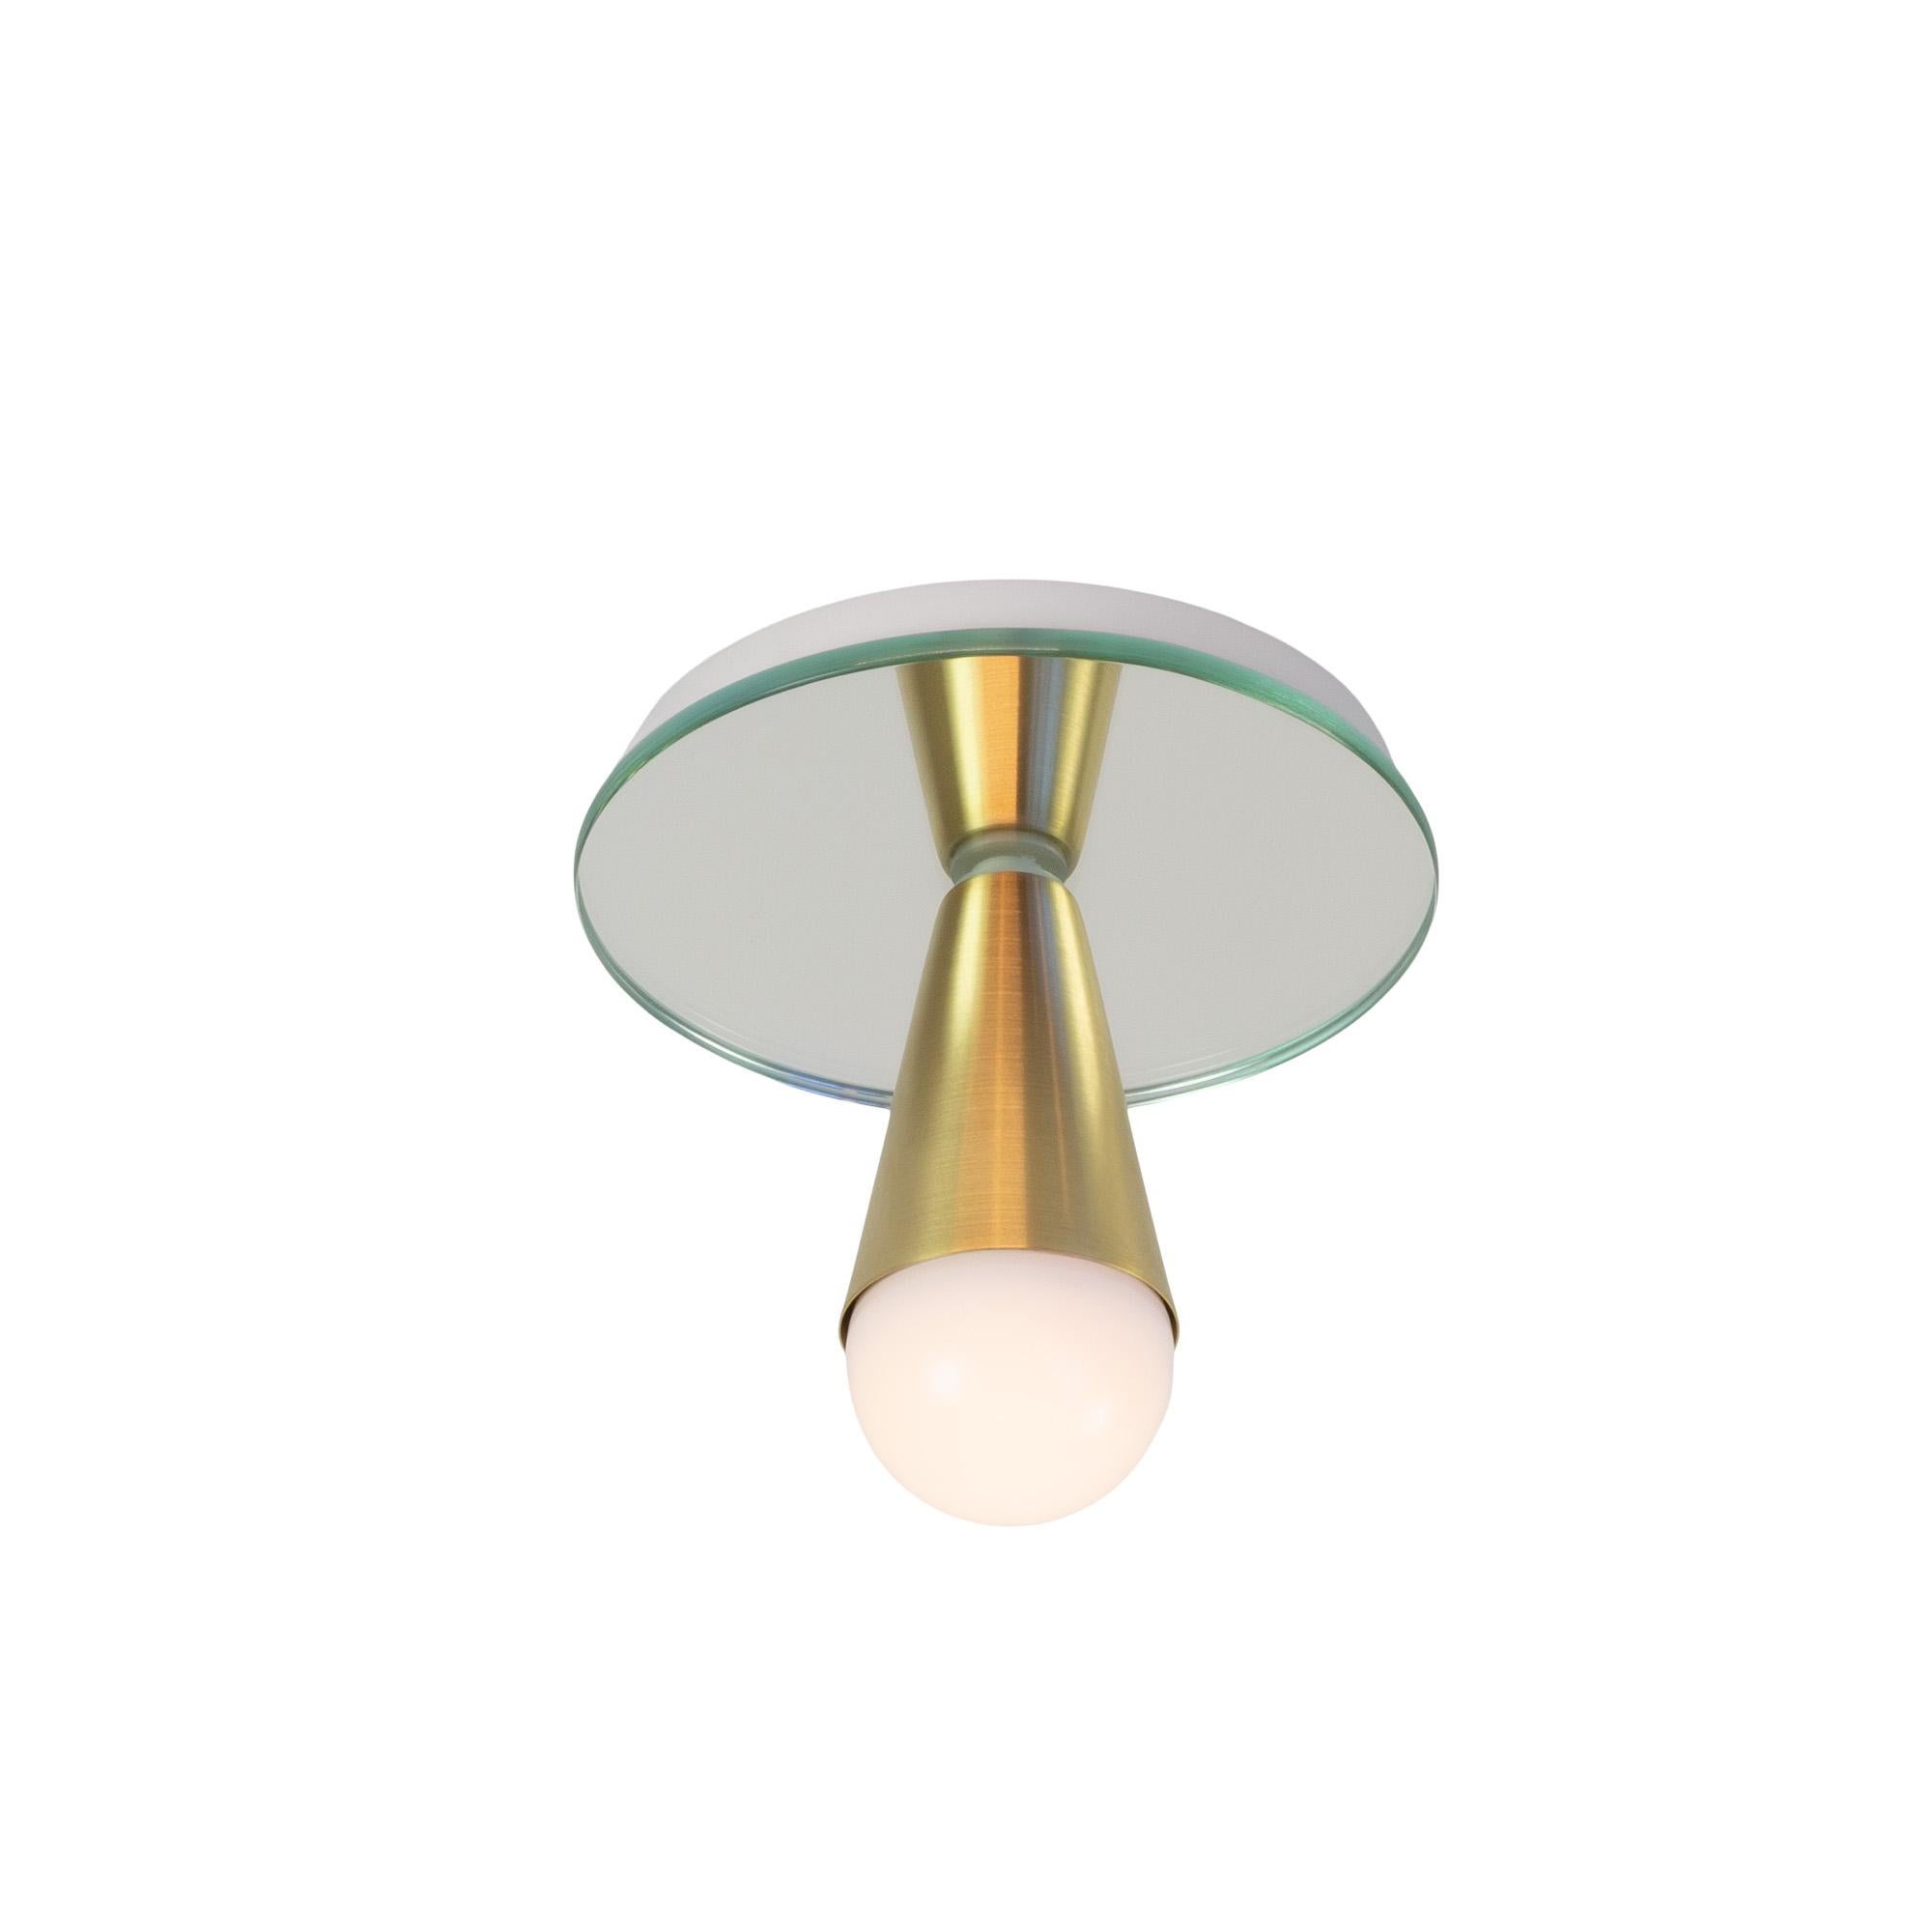 This listing is for a pair of the Echo One Flush Mounts. They also work well as sconces.

Simple, elegant and playful, the Echo Series is a line of surface-mount fixtures that can be used on a wall or ceiling. White or brass cones mount to